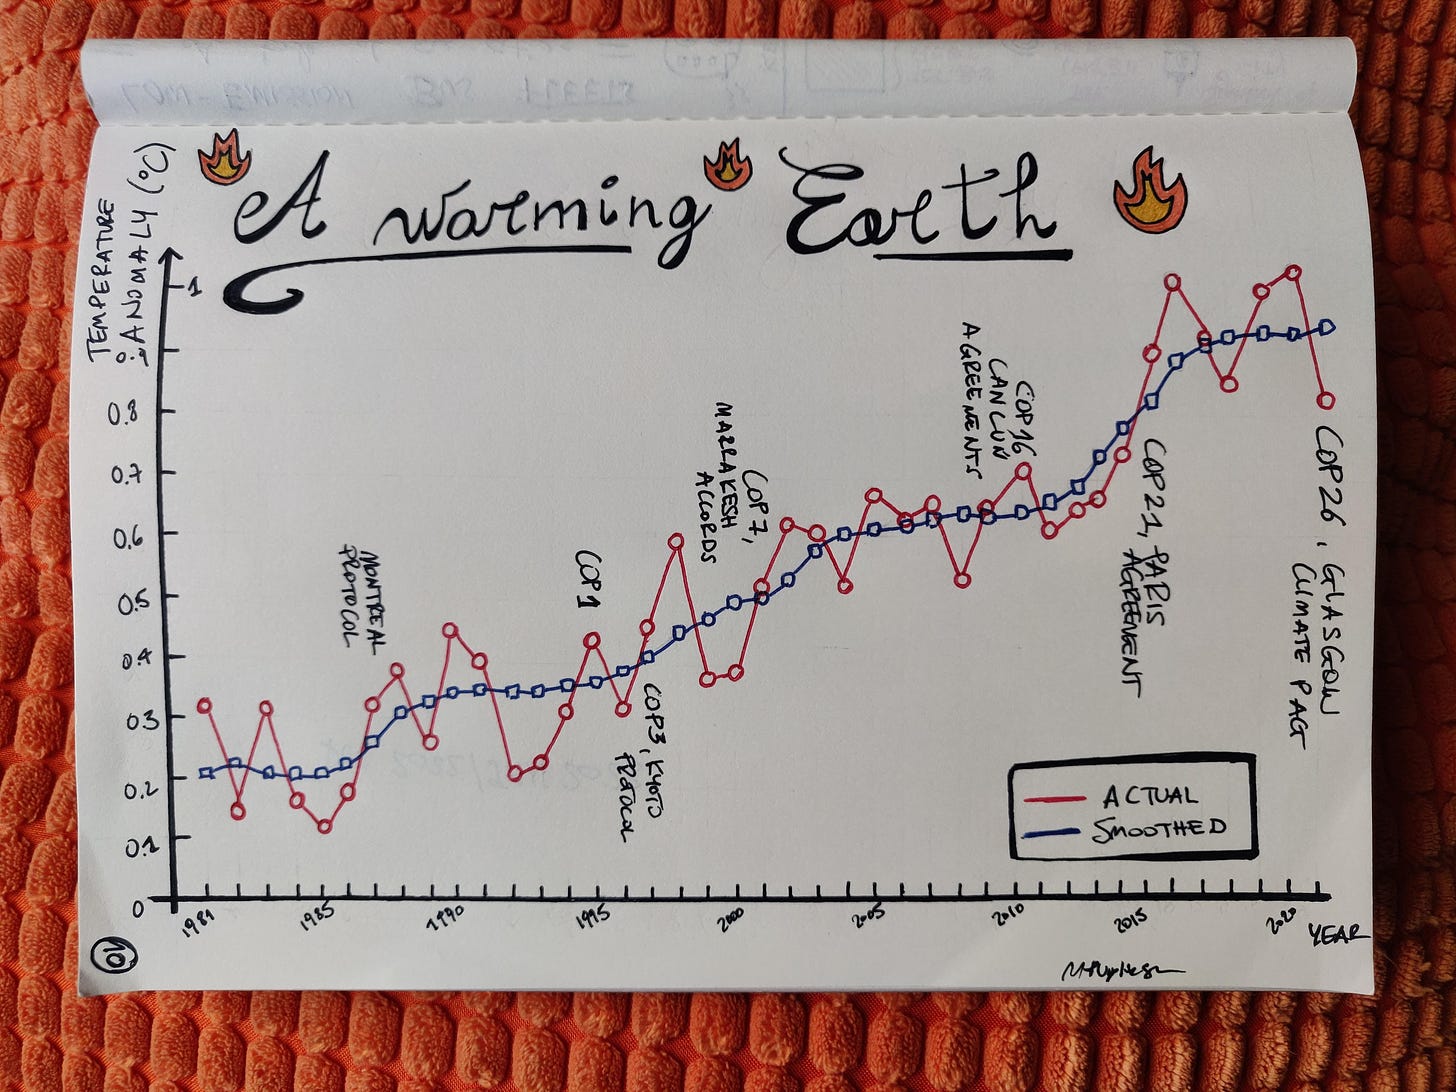 A hand-drawn graph of the global temperature anomaly from 1981 onwards, showing that the Earth is warming.